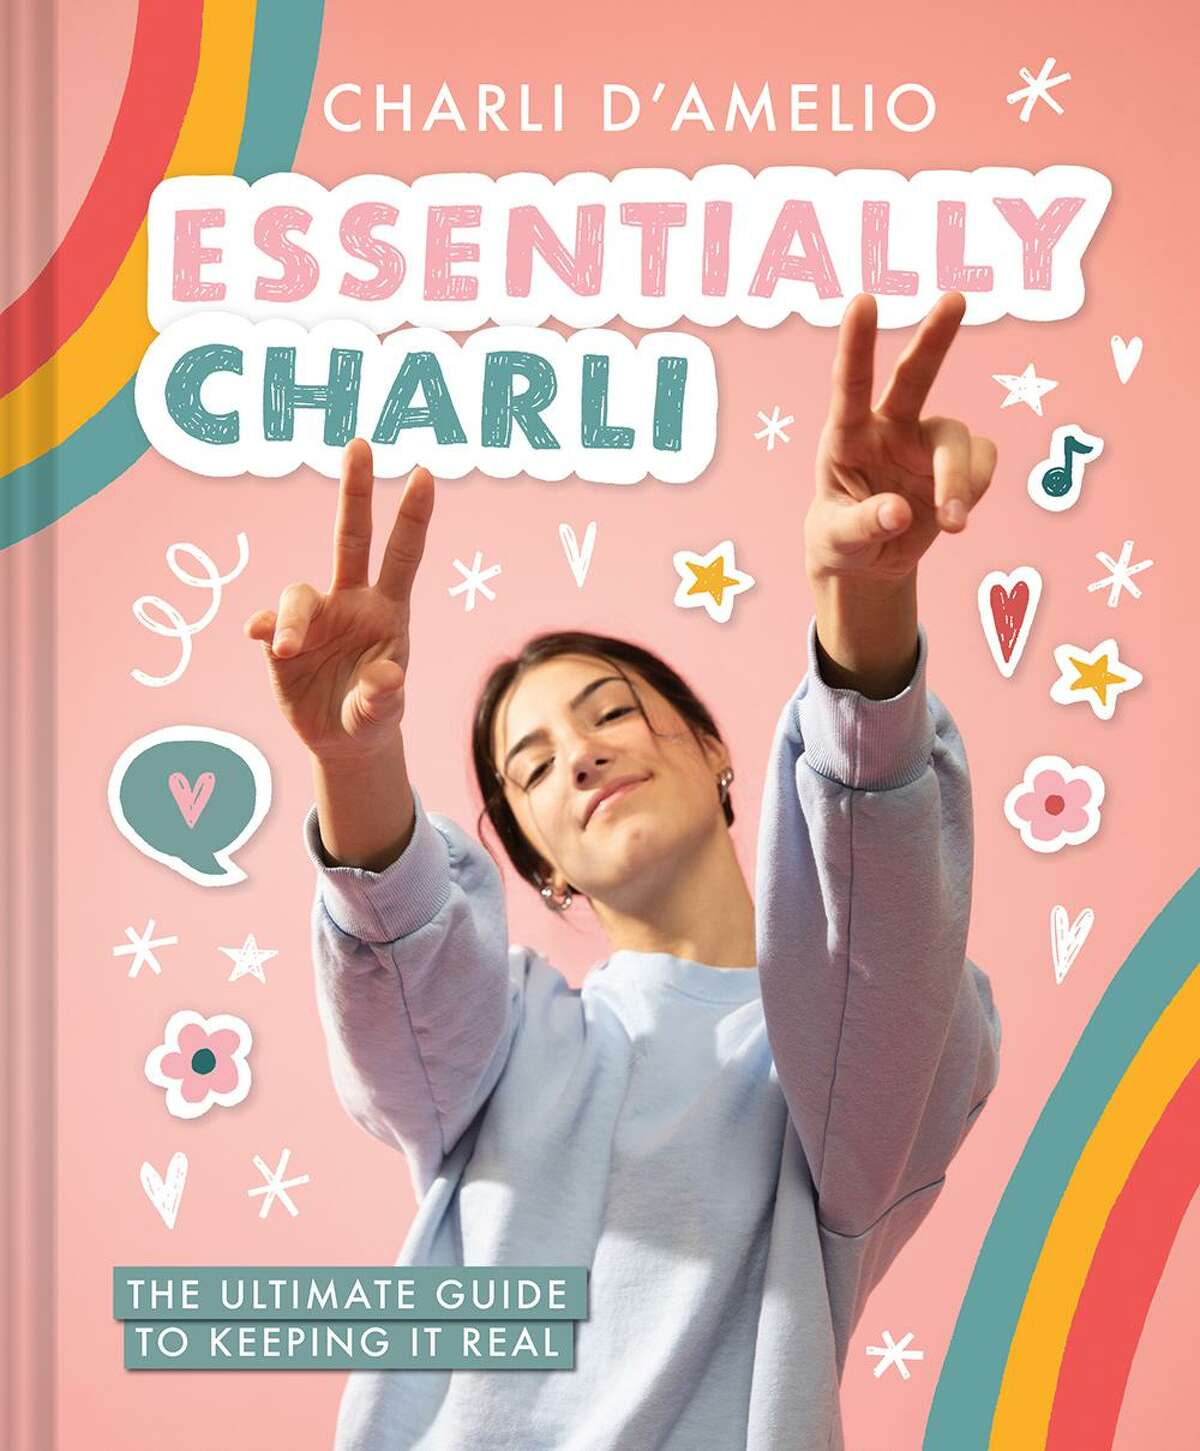 Norwalk native and TikTok star Charli D’Amelio published her book “Essentially Charli: The Ultimate Guide to Keeping it Real” on Dec. 1. The teen became the first person to gain 100 million followers on TikTok on Nov. 22. It’s an example—albeit an extreme one—of the pressures teens face due to social media. The desire to impress peers and maybe even become internet famous has put additional stressors on young people as their brains, bodies and identities develop, experts said. This has led to increased mental health challenges. “Social media has created this sort of template for an identity,” said Amber W. Childs, acting chief of psychology for Yale New Haven Hospital. “This online template of an identity persists when you’re awake and when you’re asleep and you have to maintain it during all times.” Youth mental health is a rising problem in the country, although the correlation between that and social media use has not been firmly proven, said David Fitzgerald, director of the UConn Health Child and Adolescent Psychiatry Outpatient Clinic. “It’s small and variable and still requires better and replicated kinds of studies,” he said. Across the nation 13.84 percent of youth 12 to 17 reported having at least one major depressive episode in the past year, according to Mental Health America’s latest report. This is a slight increase from the year before. Connecticut’s rate is a bit worse, at 14.24 percent this year, compared to 13.16 percent last year.